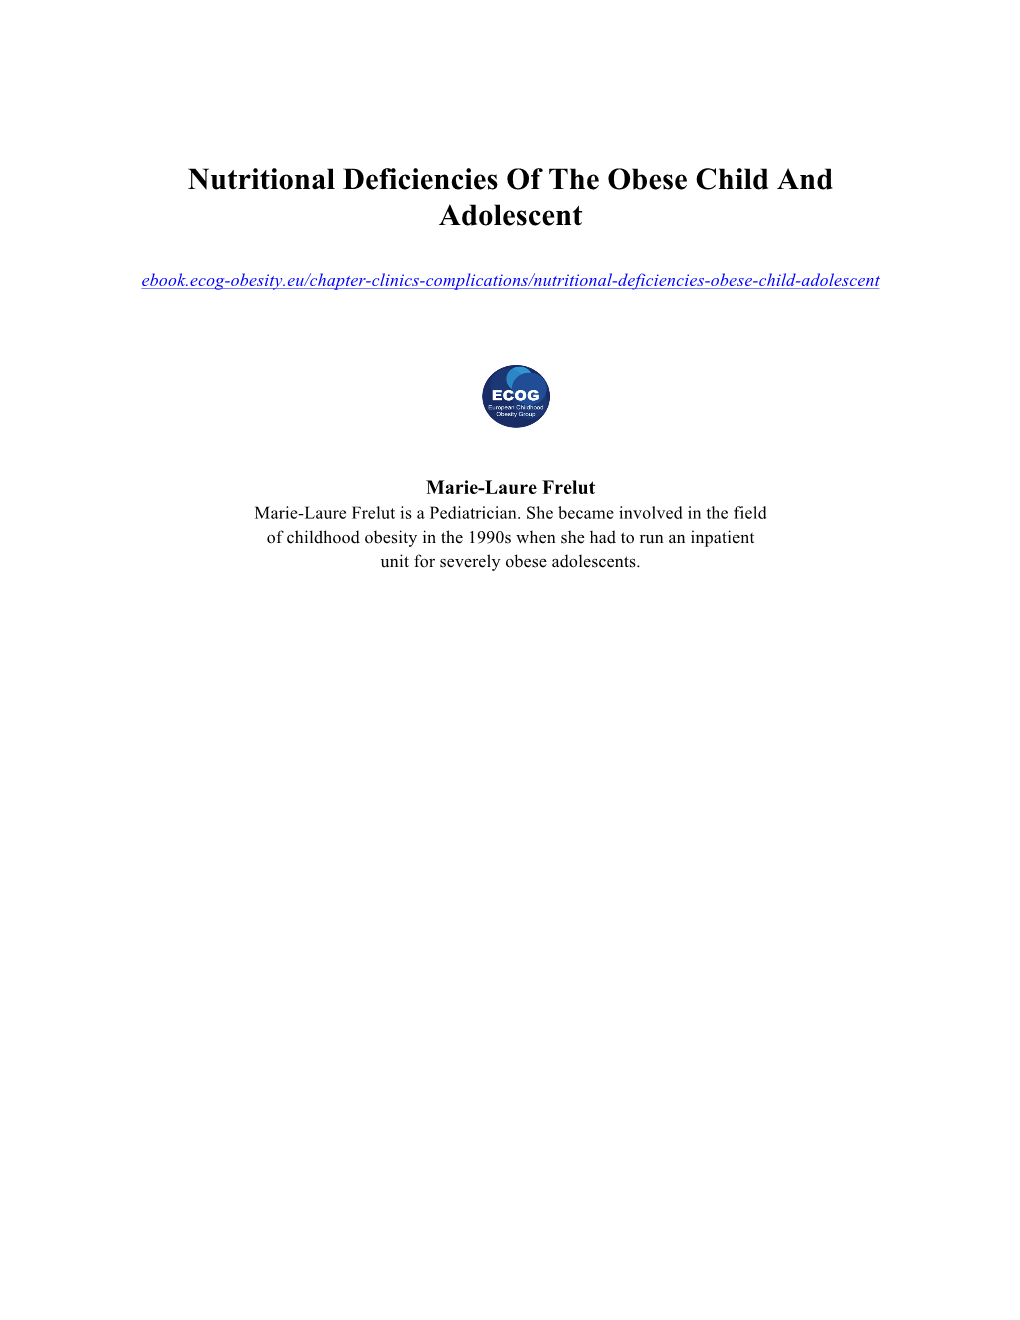 Nutritional Deficiencies of the Obese Child and Adolescent Ebook.Ecog-Obesity.Eu/Chapter-Clinics-Complications/Nutritional-Deficiencies-Obese-Child-Adolescent